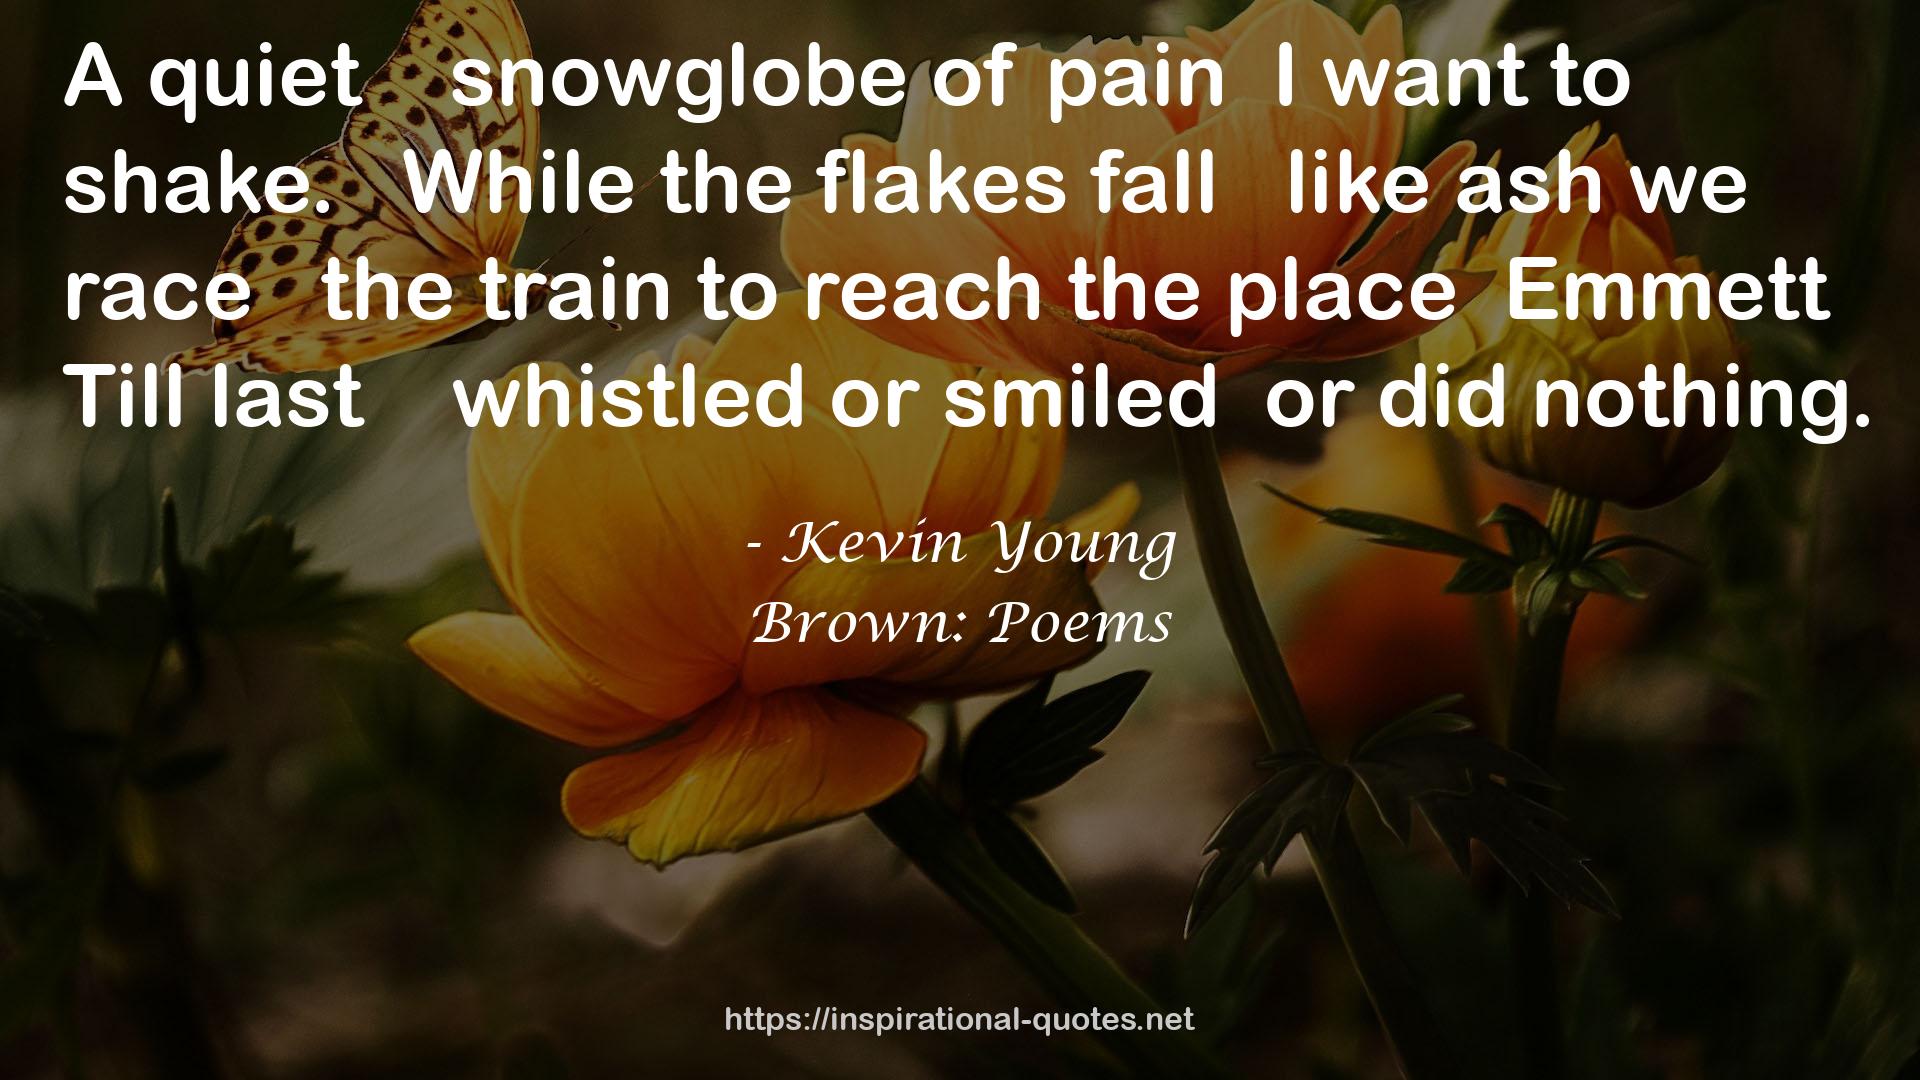 Brown: Poems QUOTES